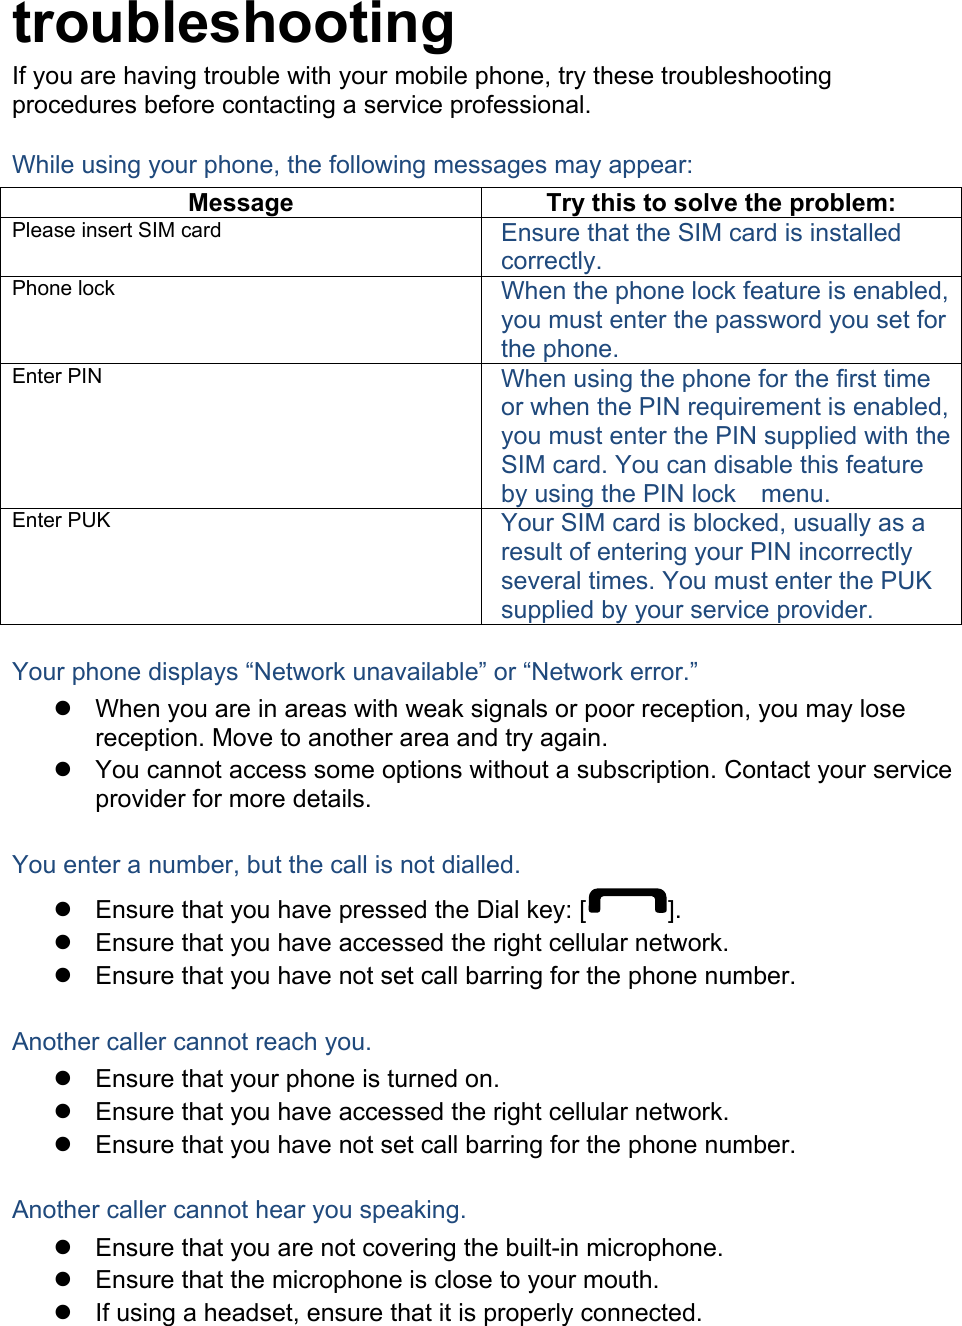  troubleshootingIf you are having trouble with your mobile phone, try these troubleshooting procedures before contacting a service professional. While using your phone, the following messages may appear: Message  Try this to solve the problem: Please insert SIM card  Ensure that the SIM card is installed correctly. Phone lock  When the phone lock feature is enabled, you must enter the password you set for the phone. Enter PIN  When using the phone for the first time or when the PIN requirement is enabled, you must enter the PIN supplied with the SIM card. You can disable this feature by using the PIN lock  menu. Enter PUK  Your SIM card is blocked, usually as a result of entering your PIN incorrectly several times. You must enter the PUK supplied by your service provider.    Your phone displays “Network unavailable” or “Network error.”   When you are in areas with weak signals or poor reception, you may lose reception. Move to another area and try again.   You cannot access some options without a subscription. Contact your service provider for more details.  You enter a number, but the call is not dialled.   Ensure that you have pressed the Dial key: [ ].   Ensure that you have accessed the right cellular network.   Ensure that you have not set call barring for the phone number.  Another caller cannot reach you.   Ensure that your phone is turned on.   Ensure that you have accessed the right cellular network.   Ensure that you have not set call barring for the phone number.  Another caller cannot hear you speaking.   Ensure that you are not covering the built-in microphone.   Ensure that the microphone is close to your mouth.   If using a headset, ensure that it is properly connected.  